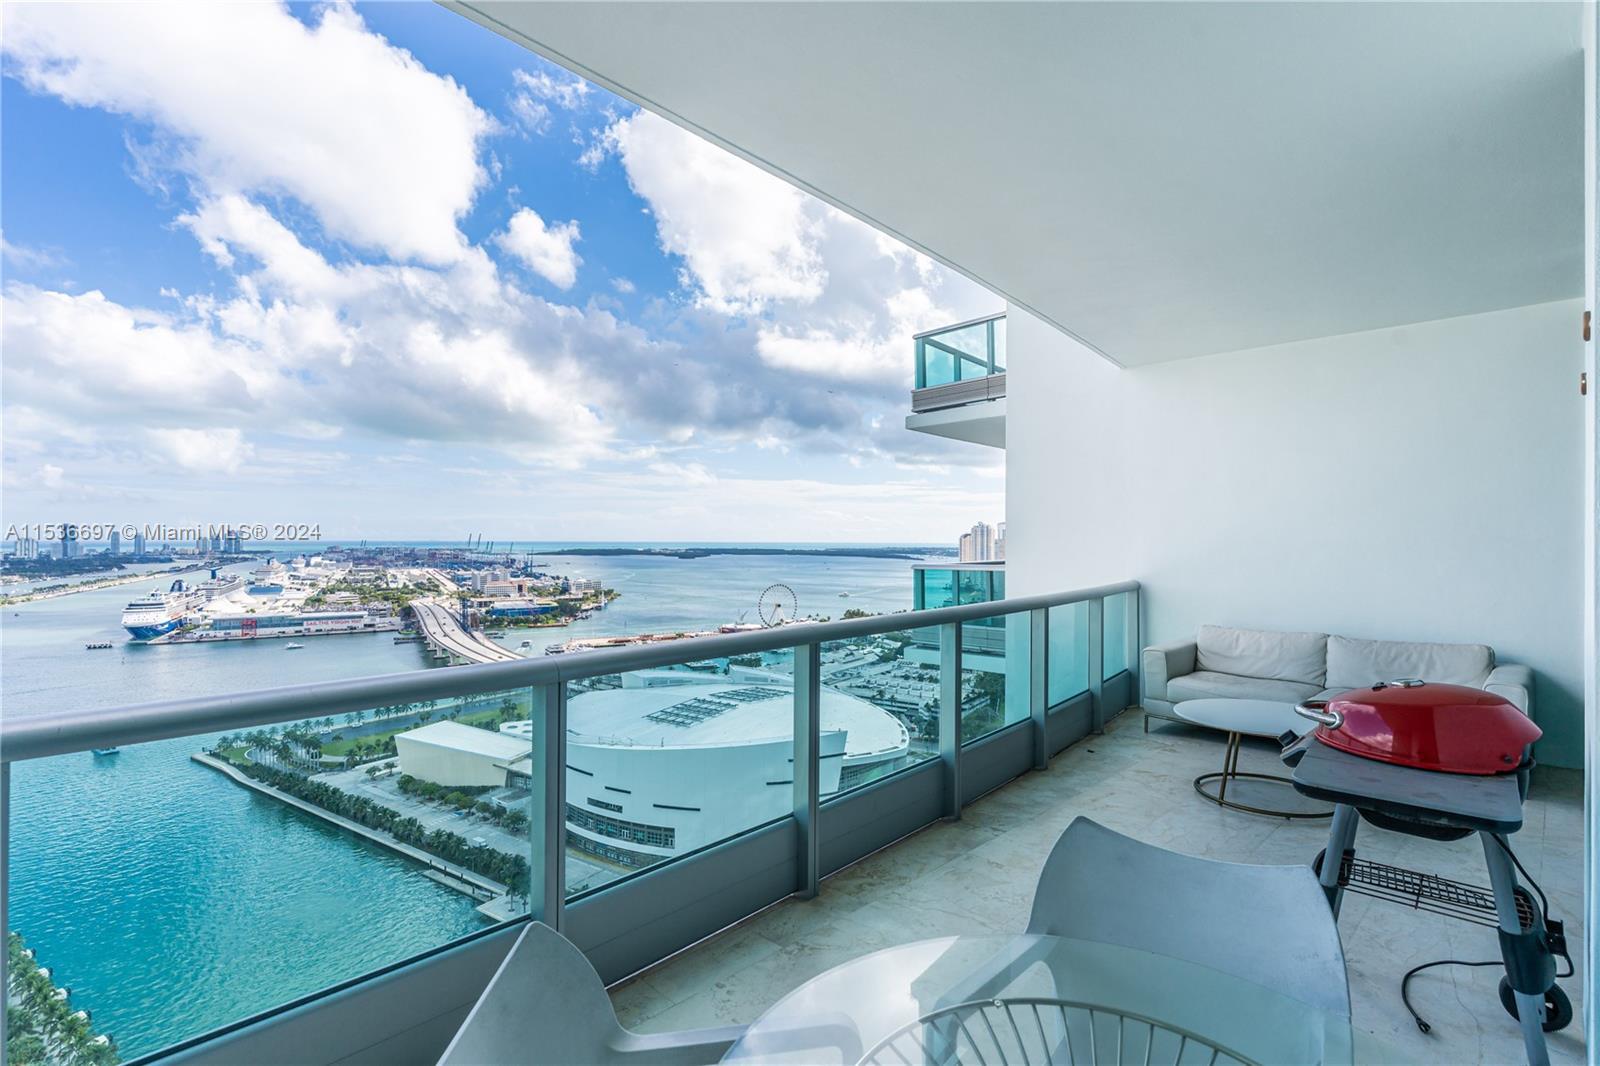 Stunning 3 bedrooms / 3 bathrooms apartment with panoramic views of Port of Miami, downtown, and Mia